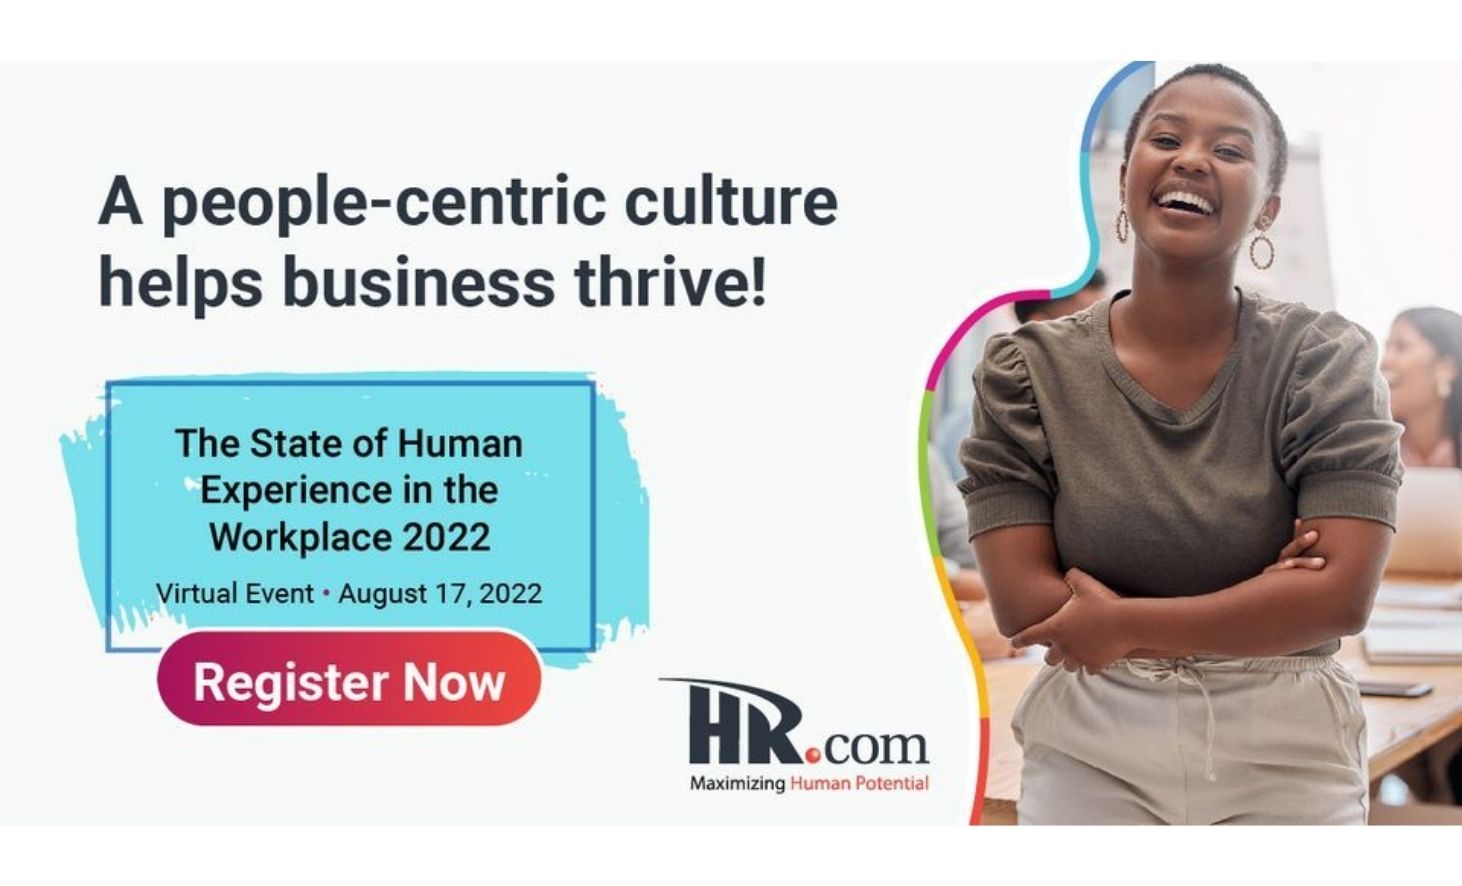 The State of Human Experience in the Workplace 2022